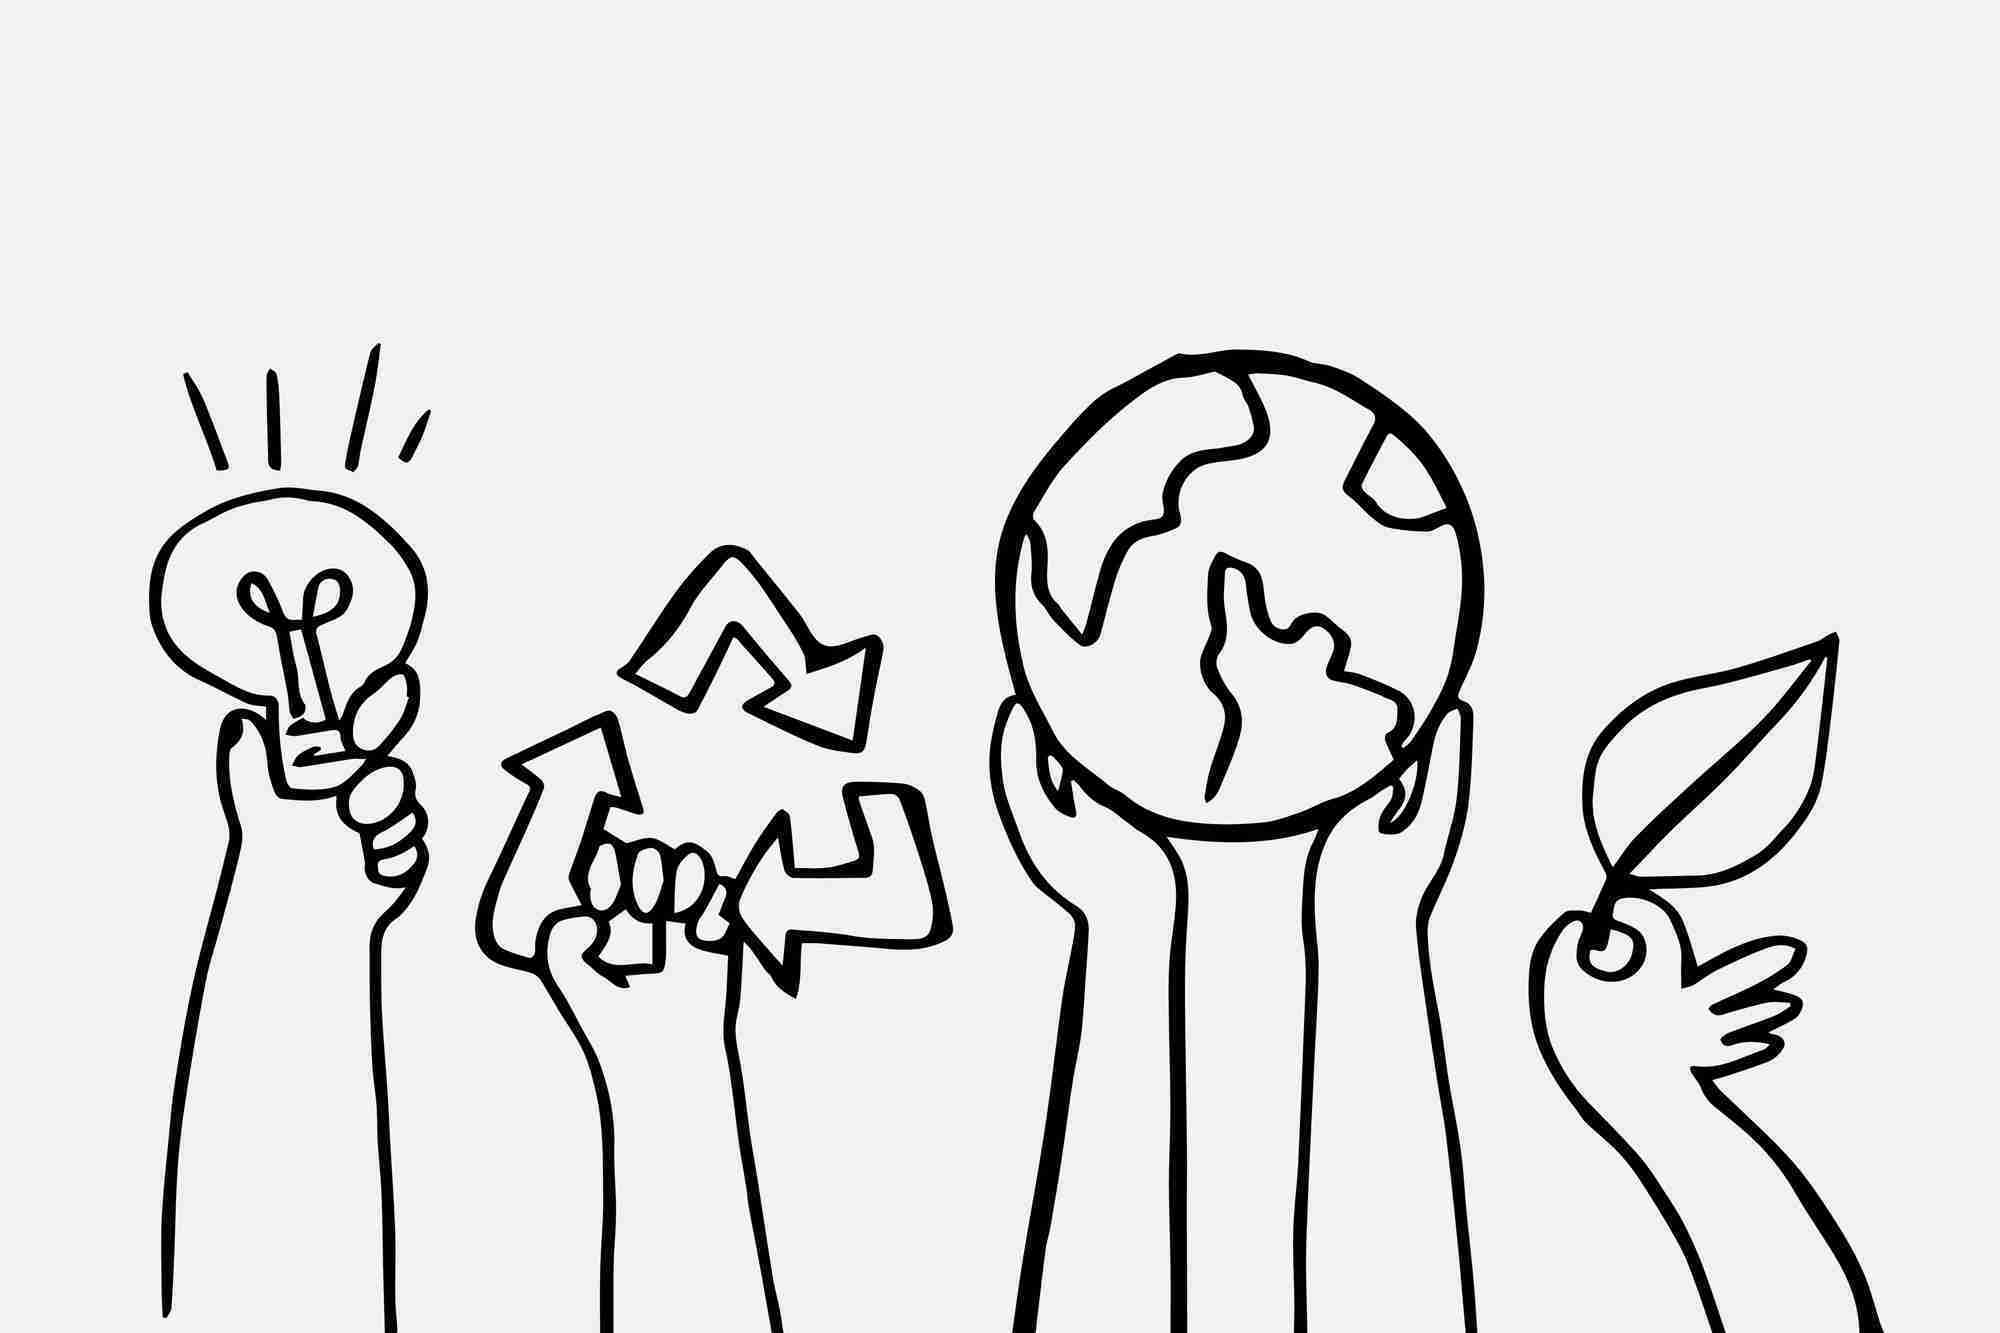 a black and white drawing of people holding up arrows.